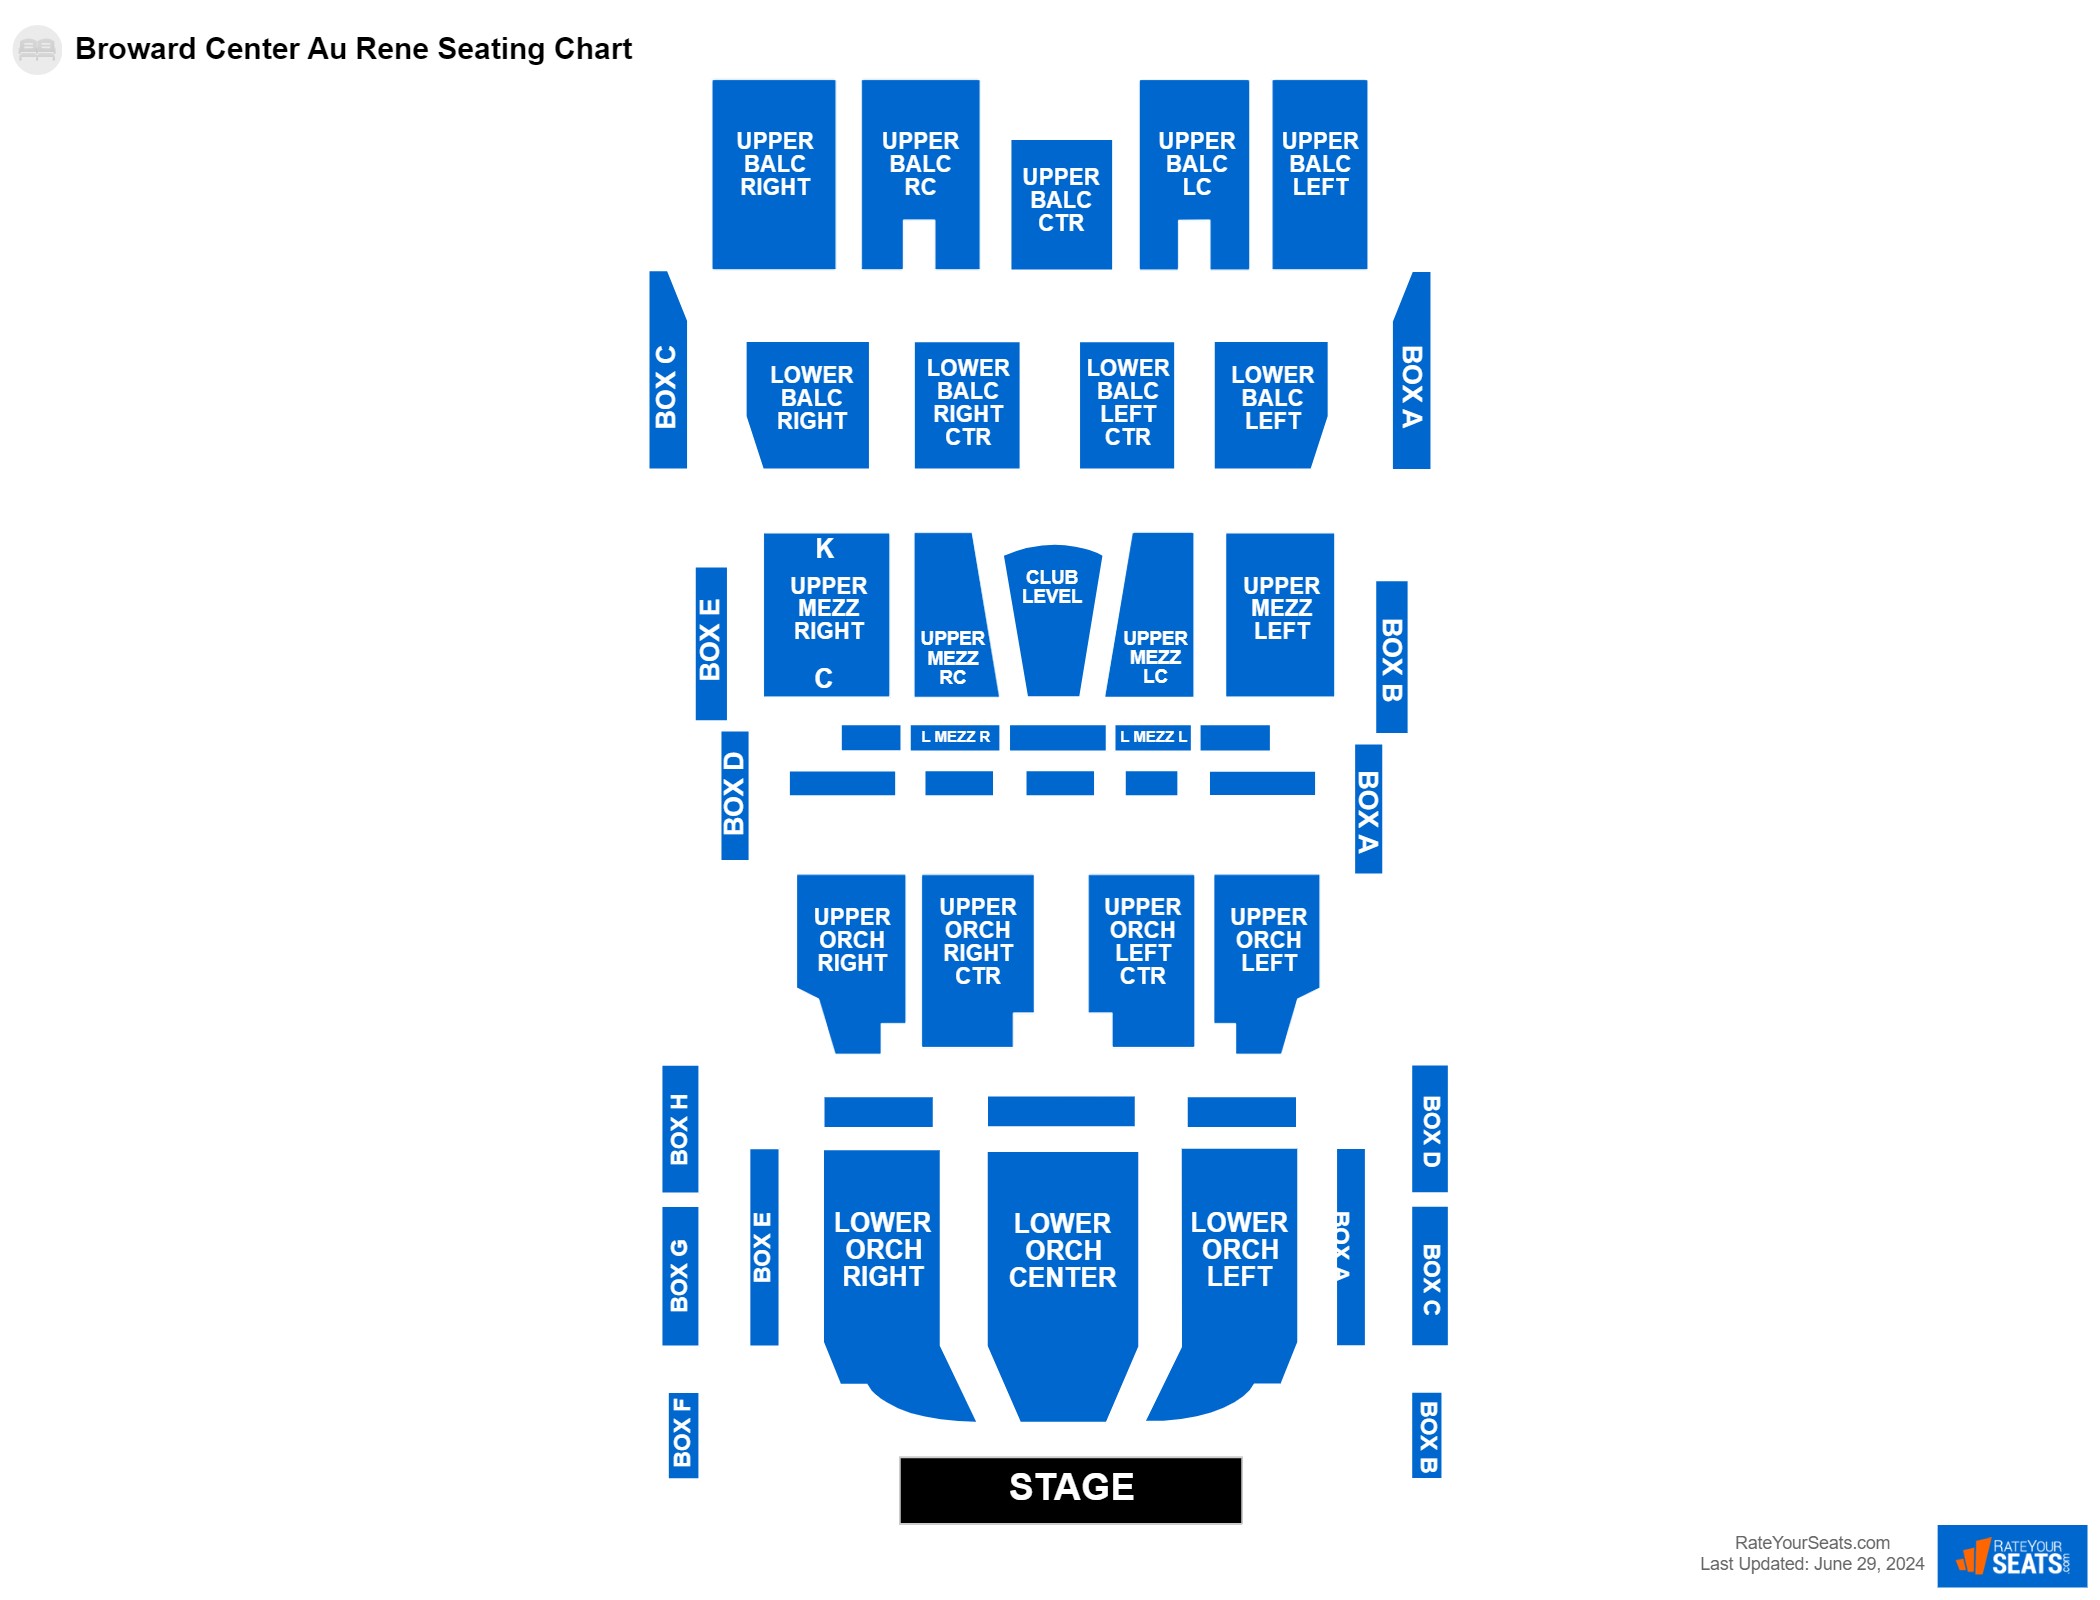 Comedy seating chart at Broward Center Au Rene